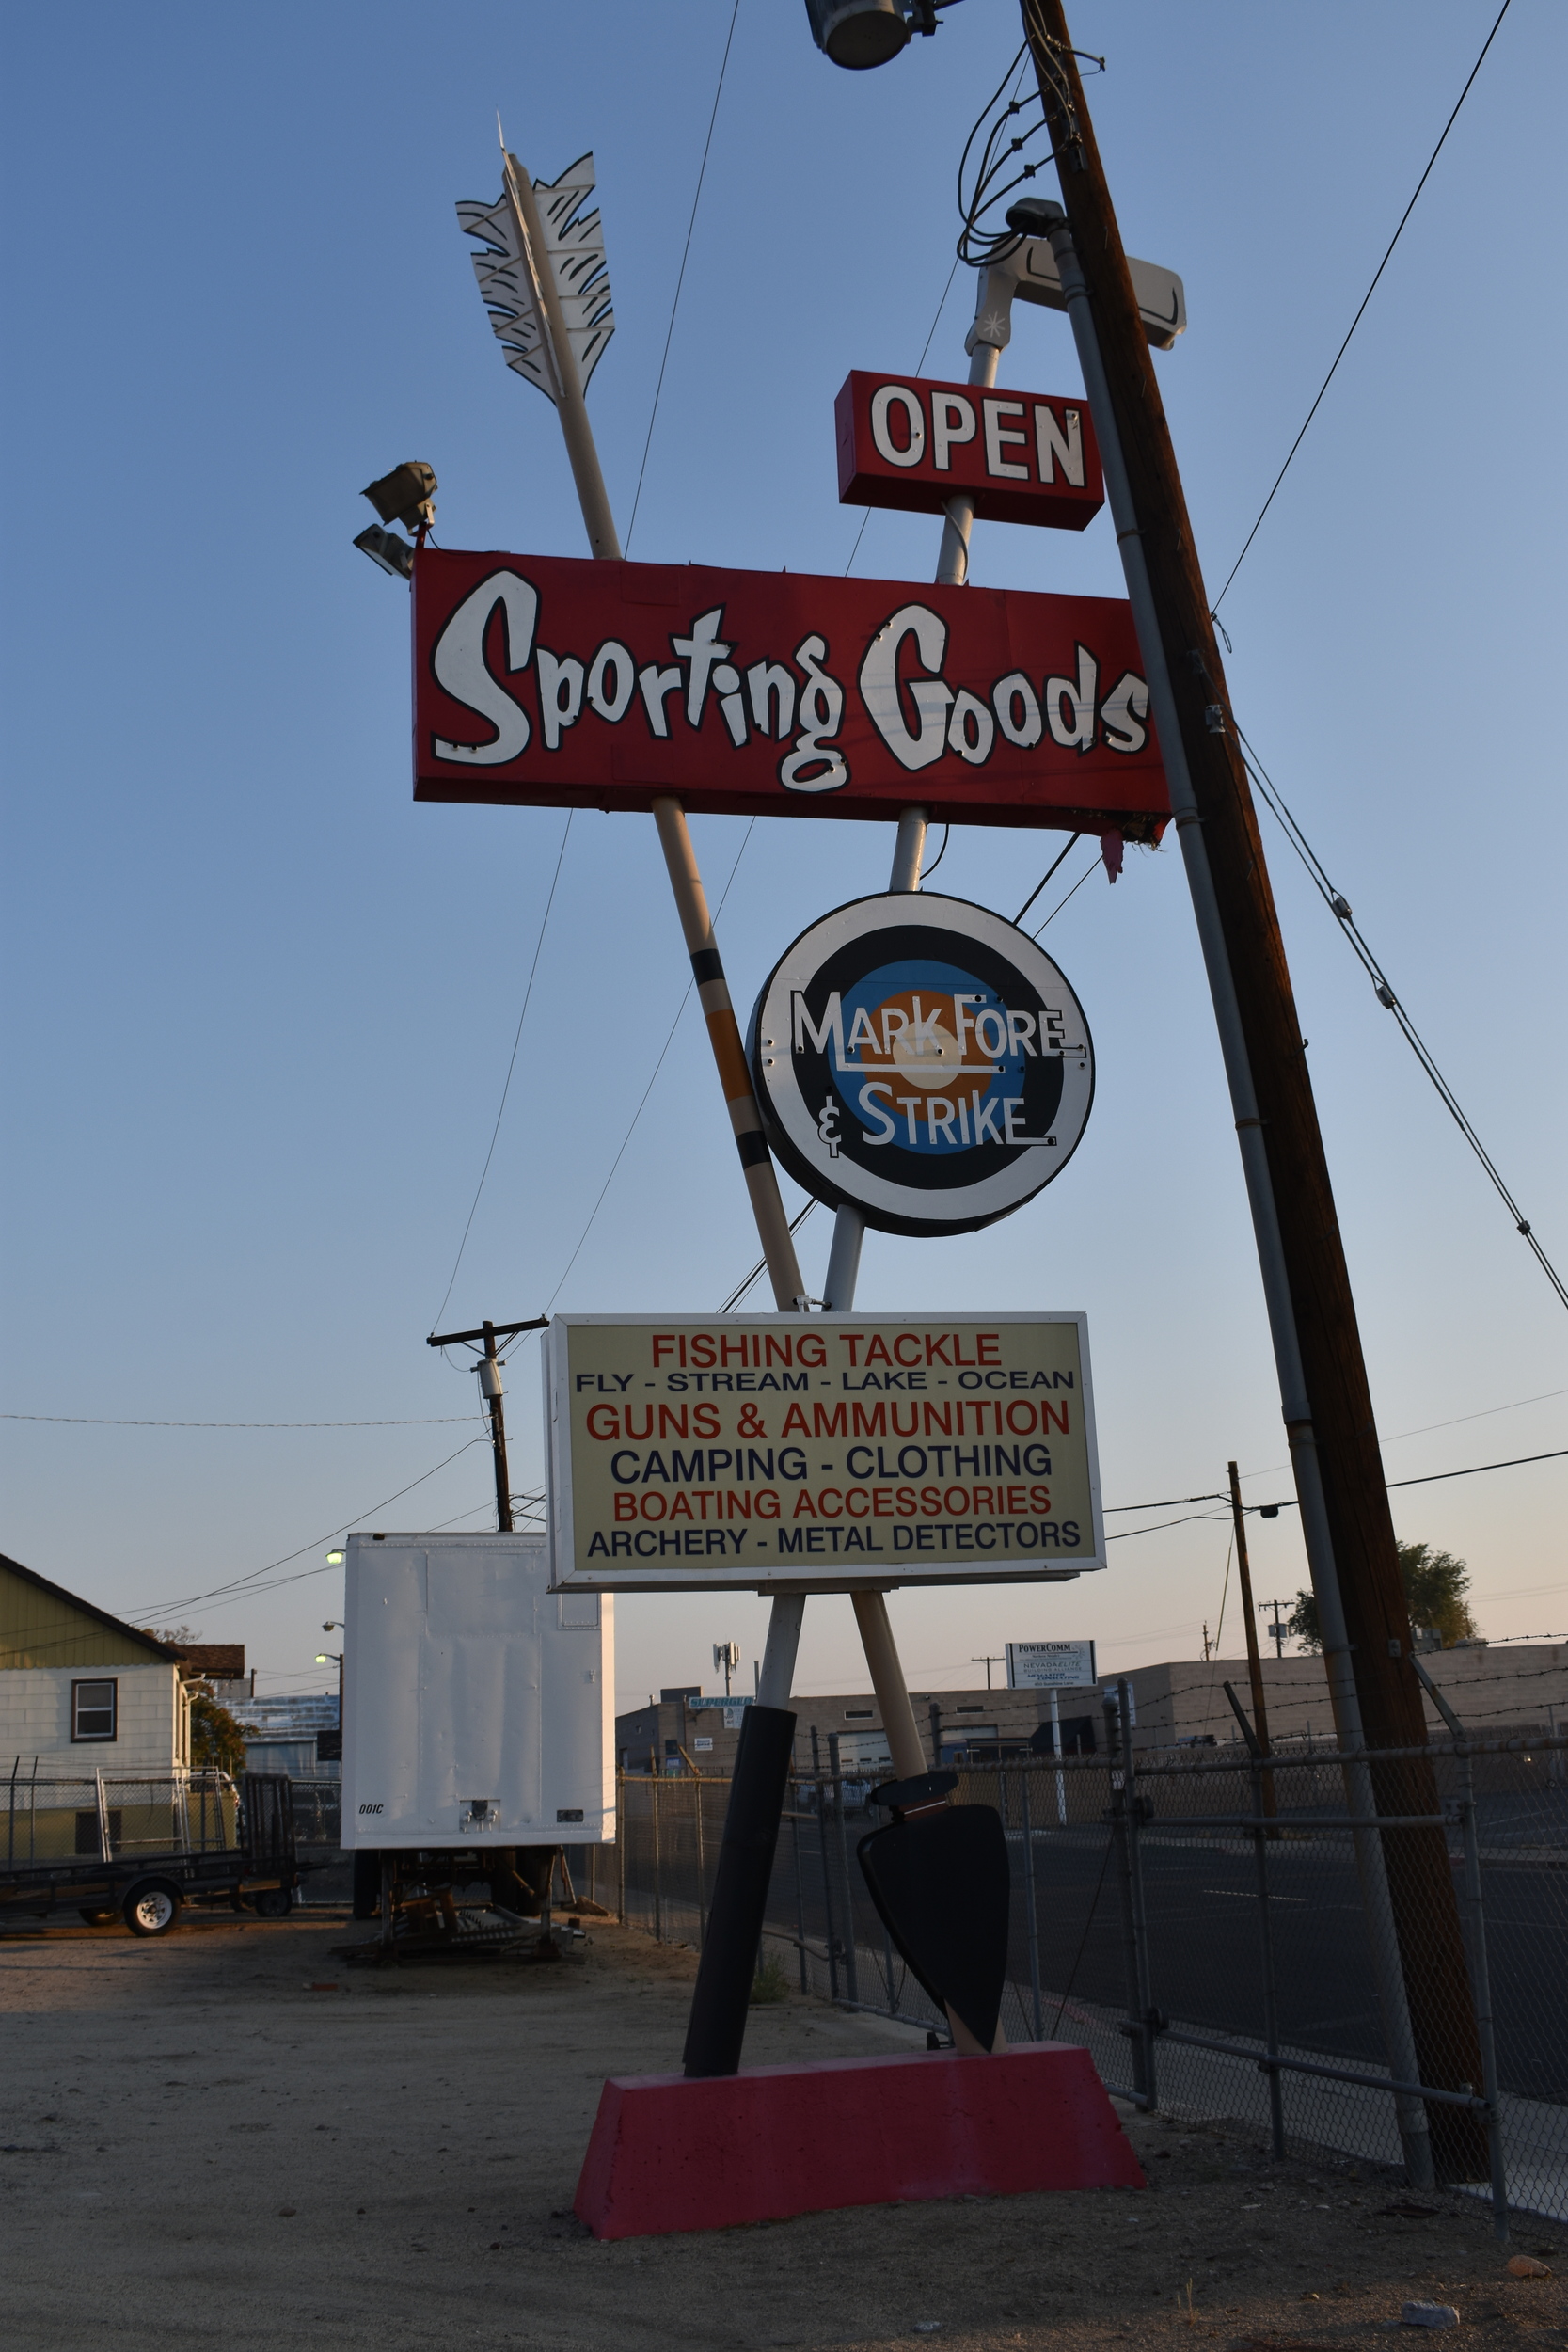 Mark Fore & Strike Sporting Goods mounted sign, Reno, Nevada